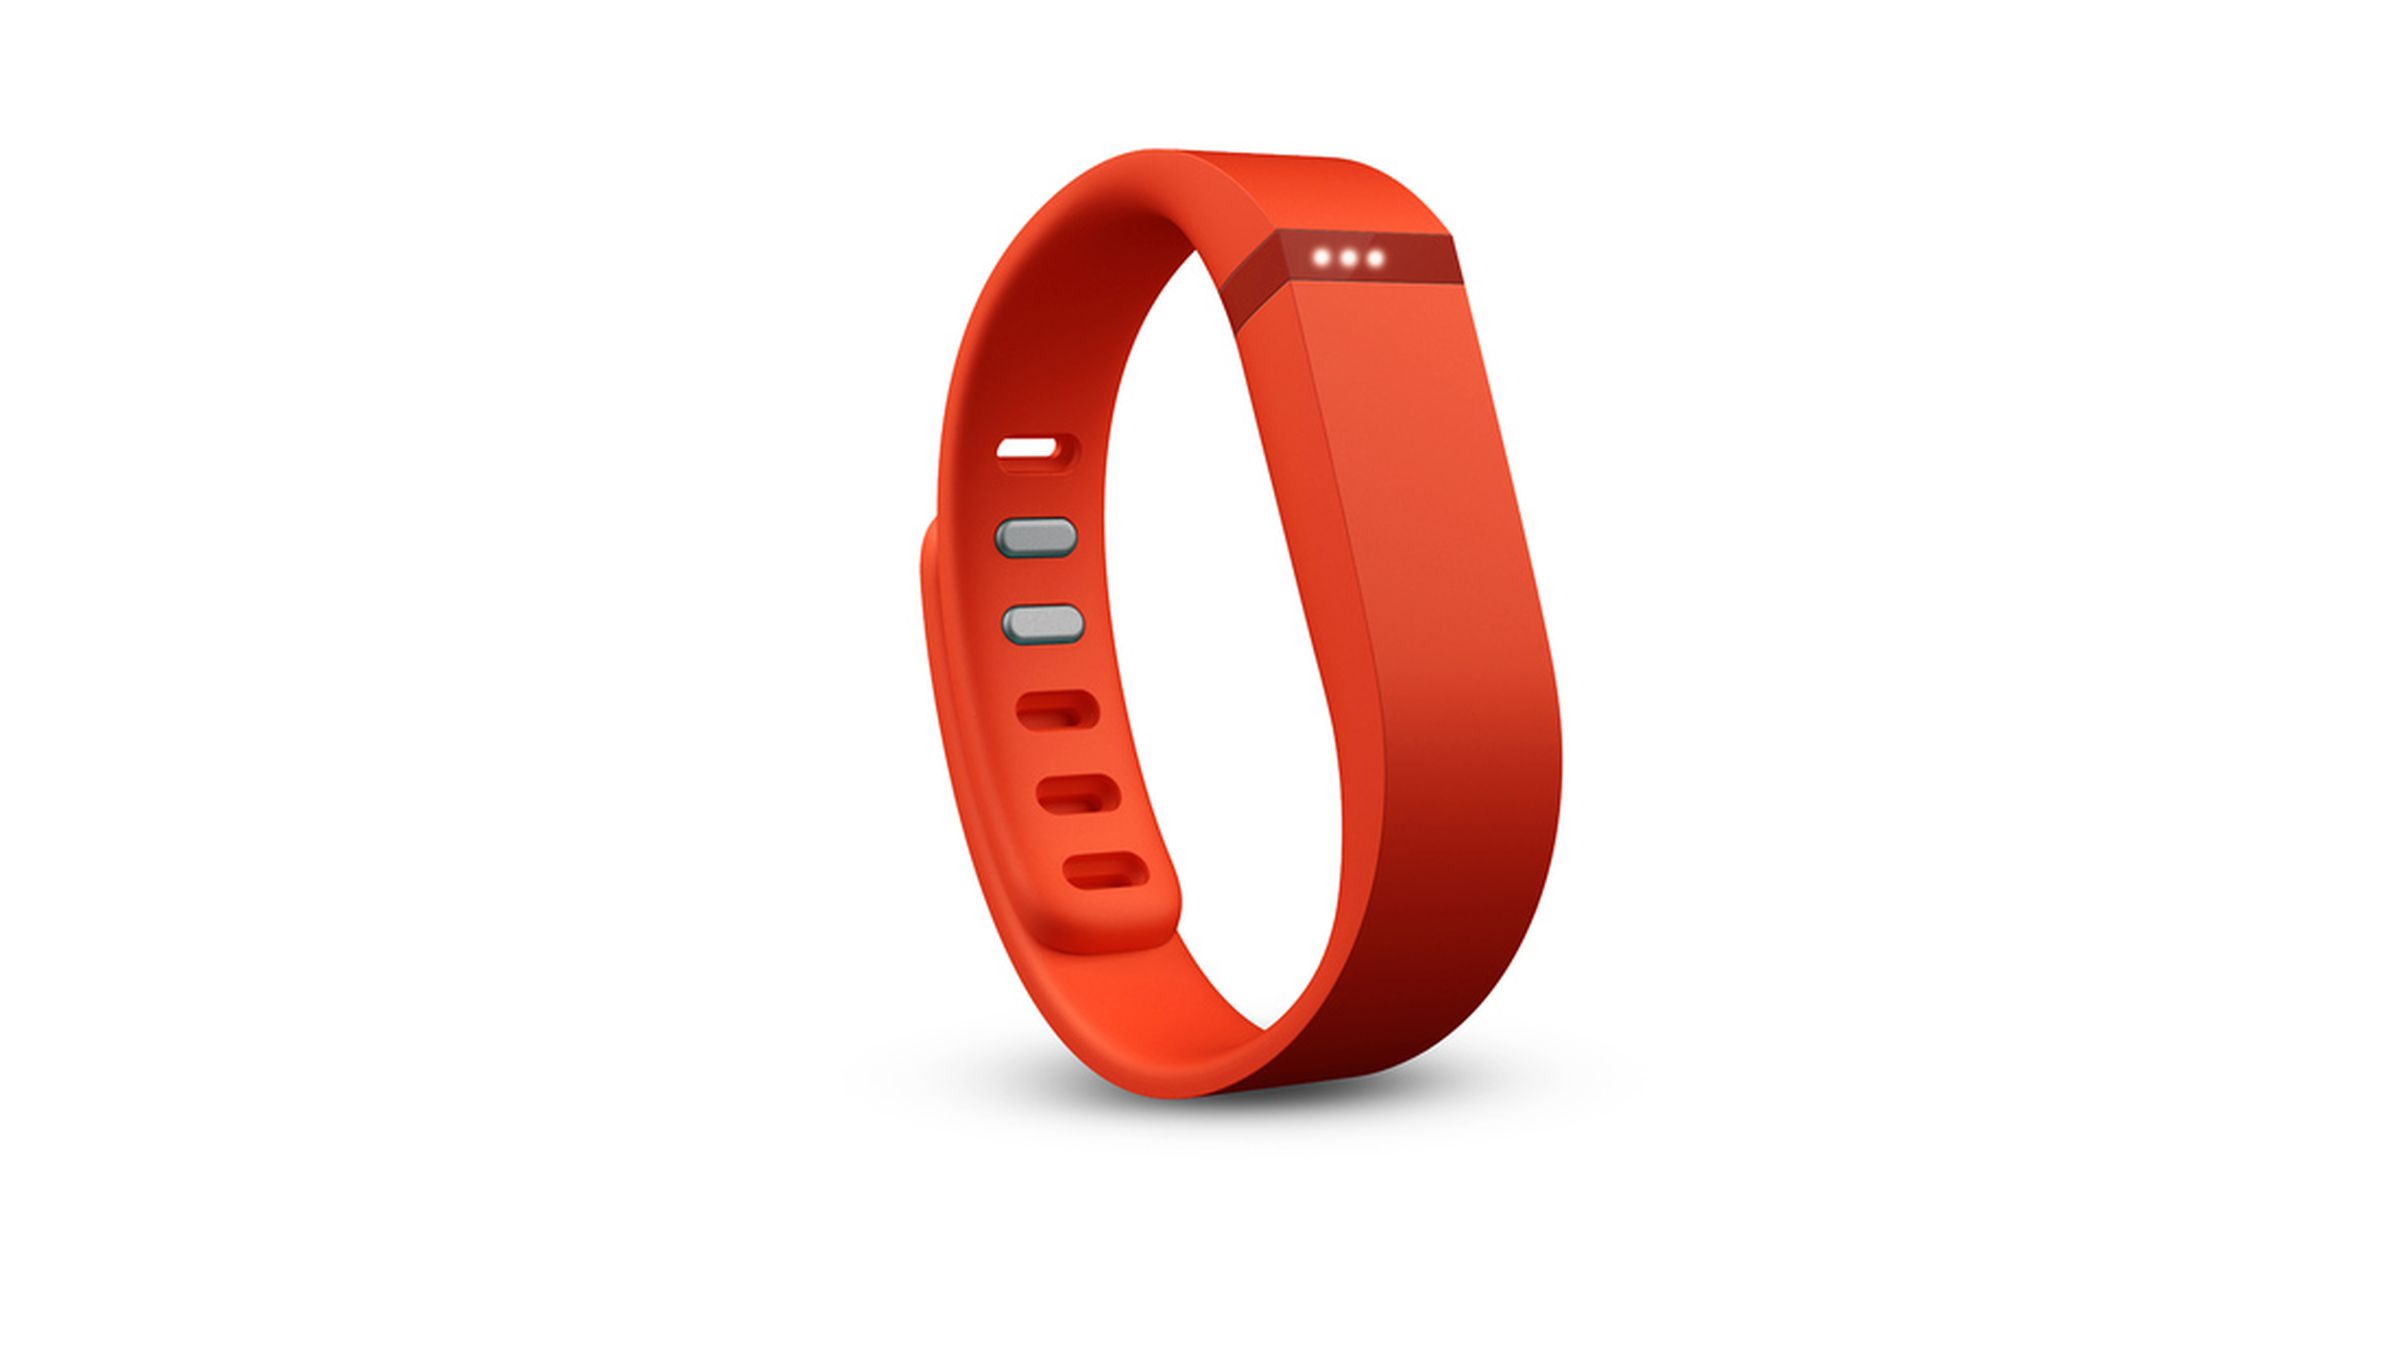 Gallery of Fitbit Flex images